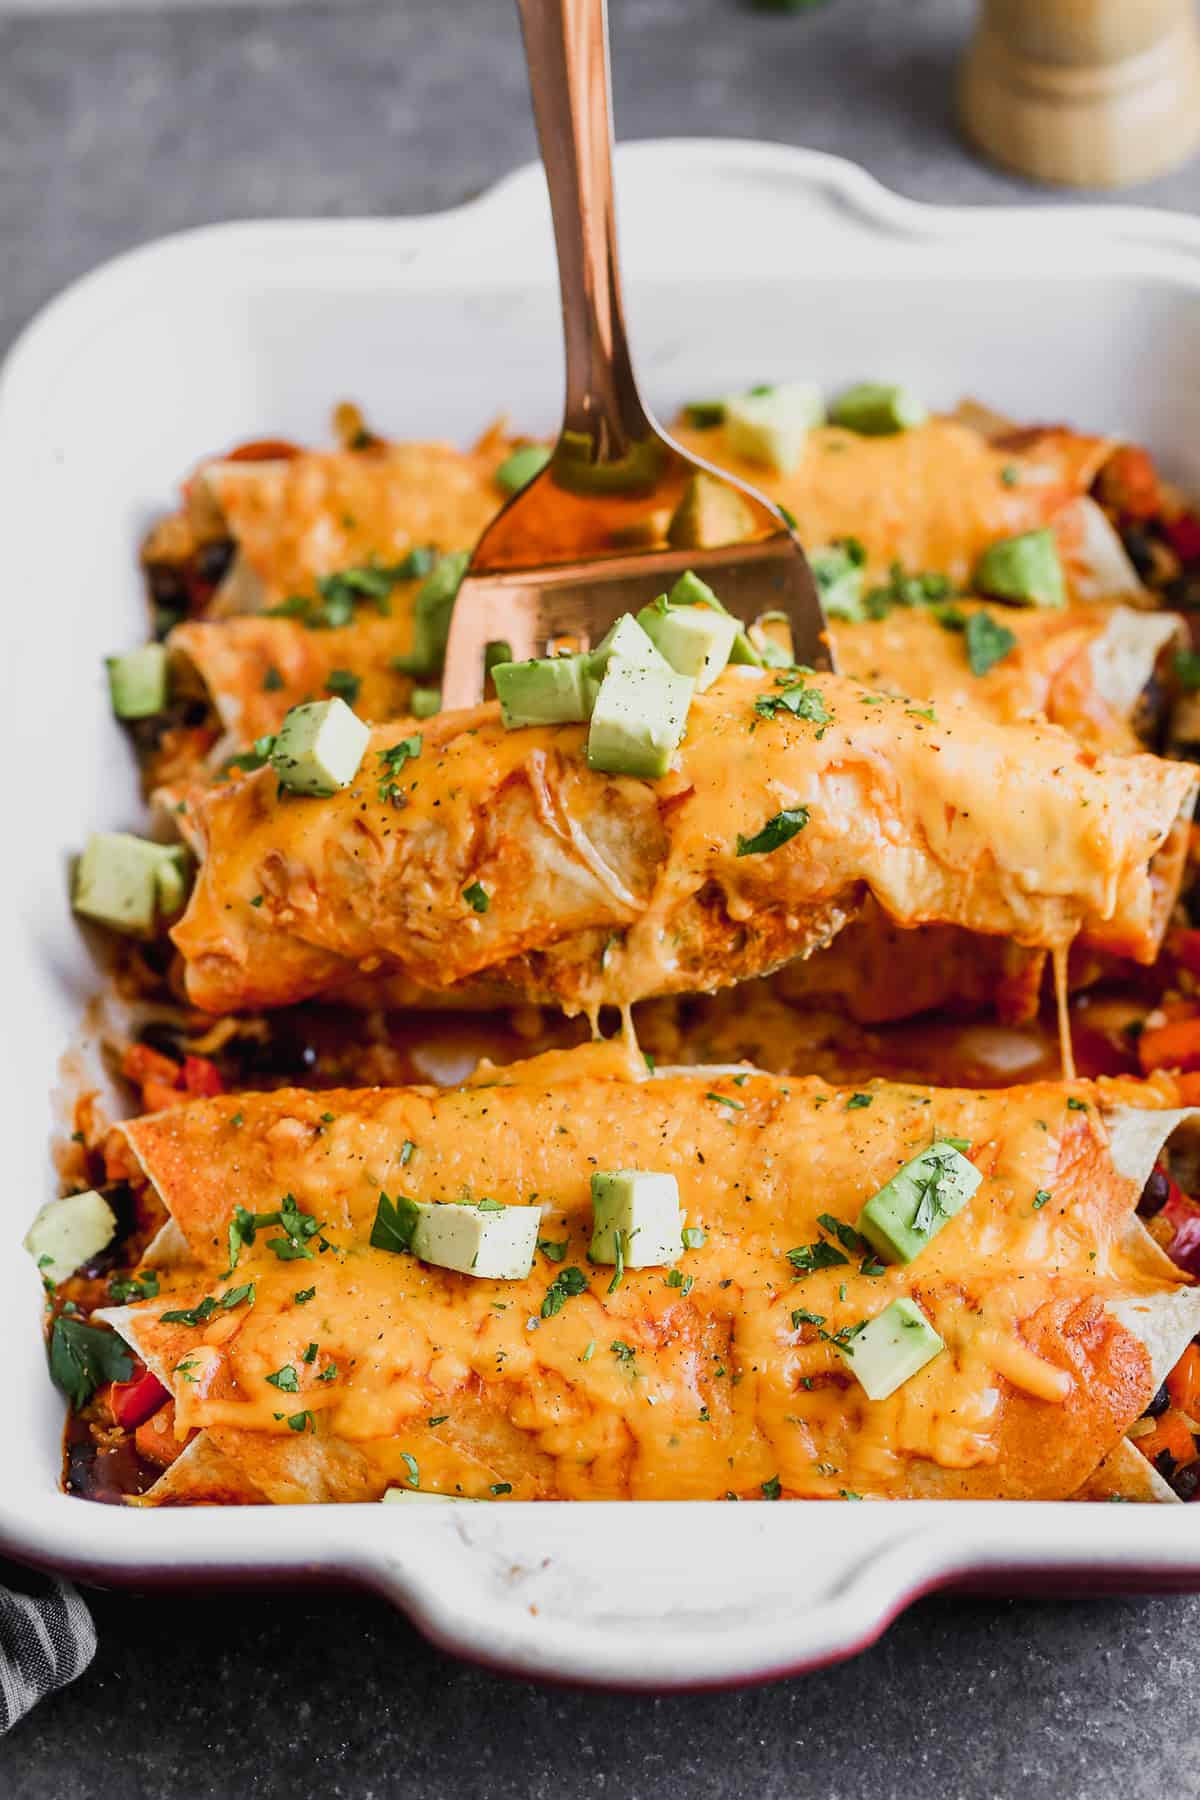 A sweet potato enchilada being lifted by a spatula from a white baking dish, freshly baked and topped with chopped avocado.